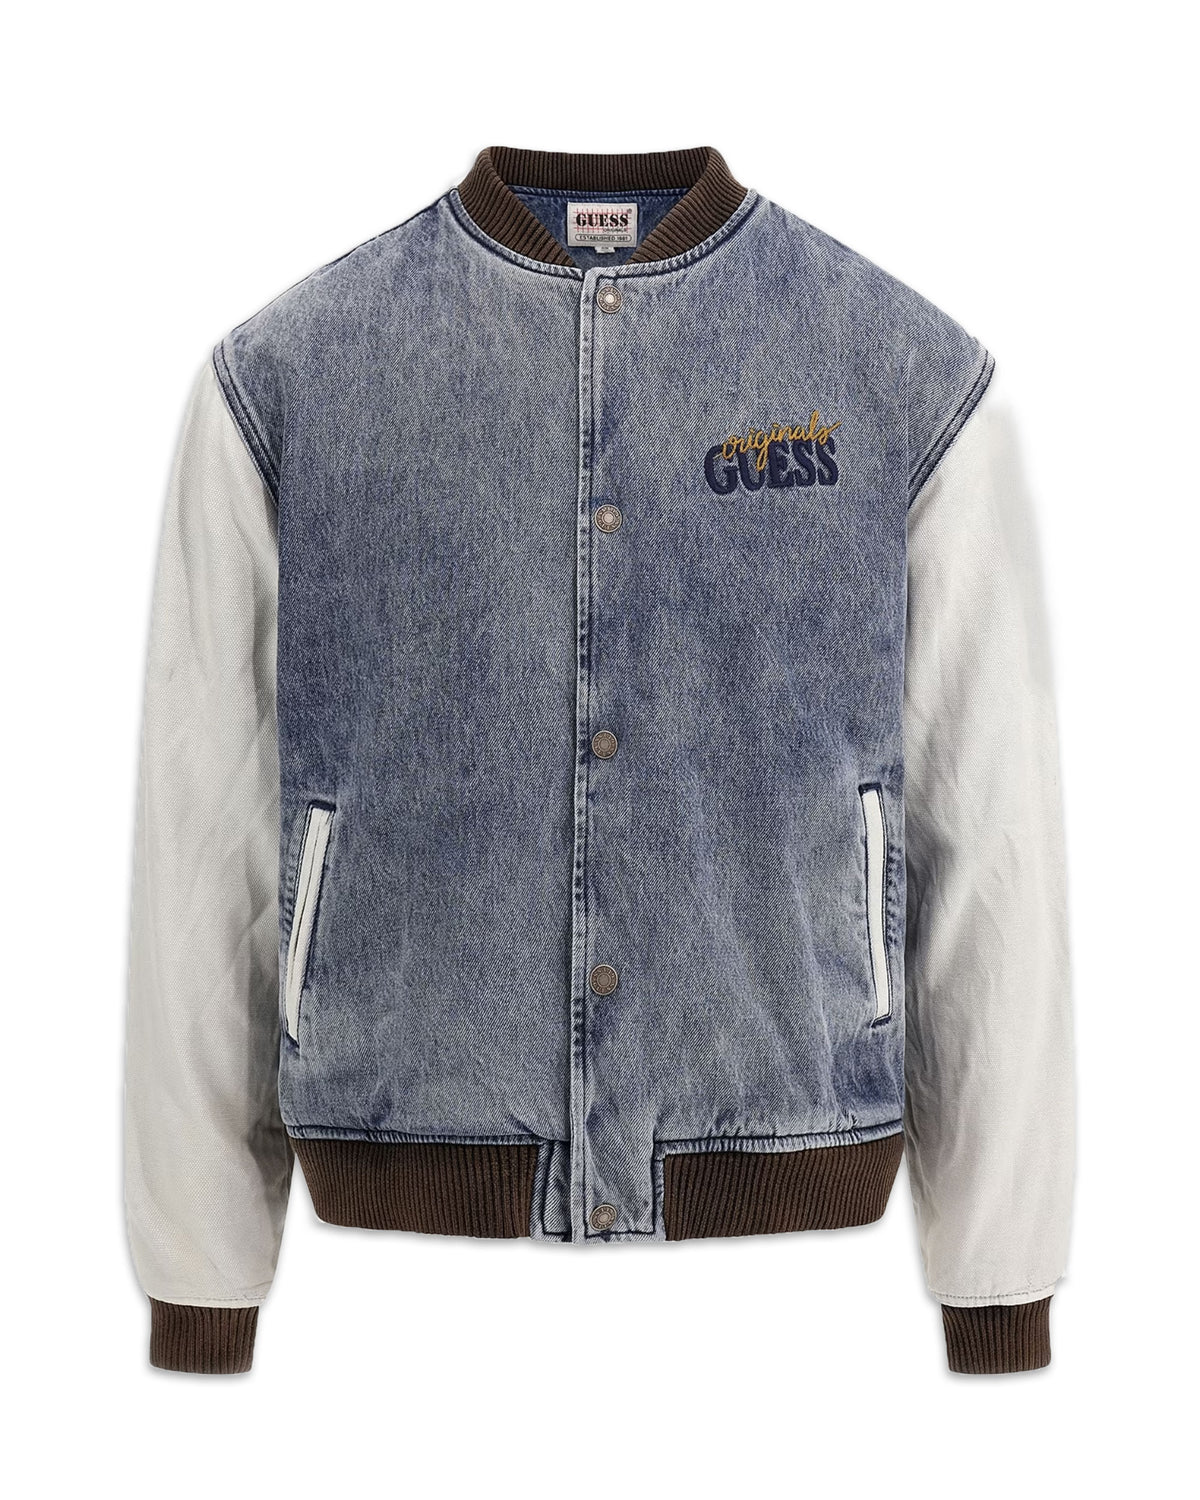 Guess Originals Giacca bomber jeans